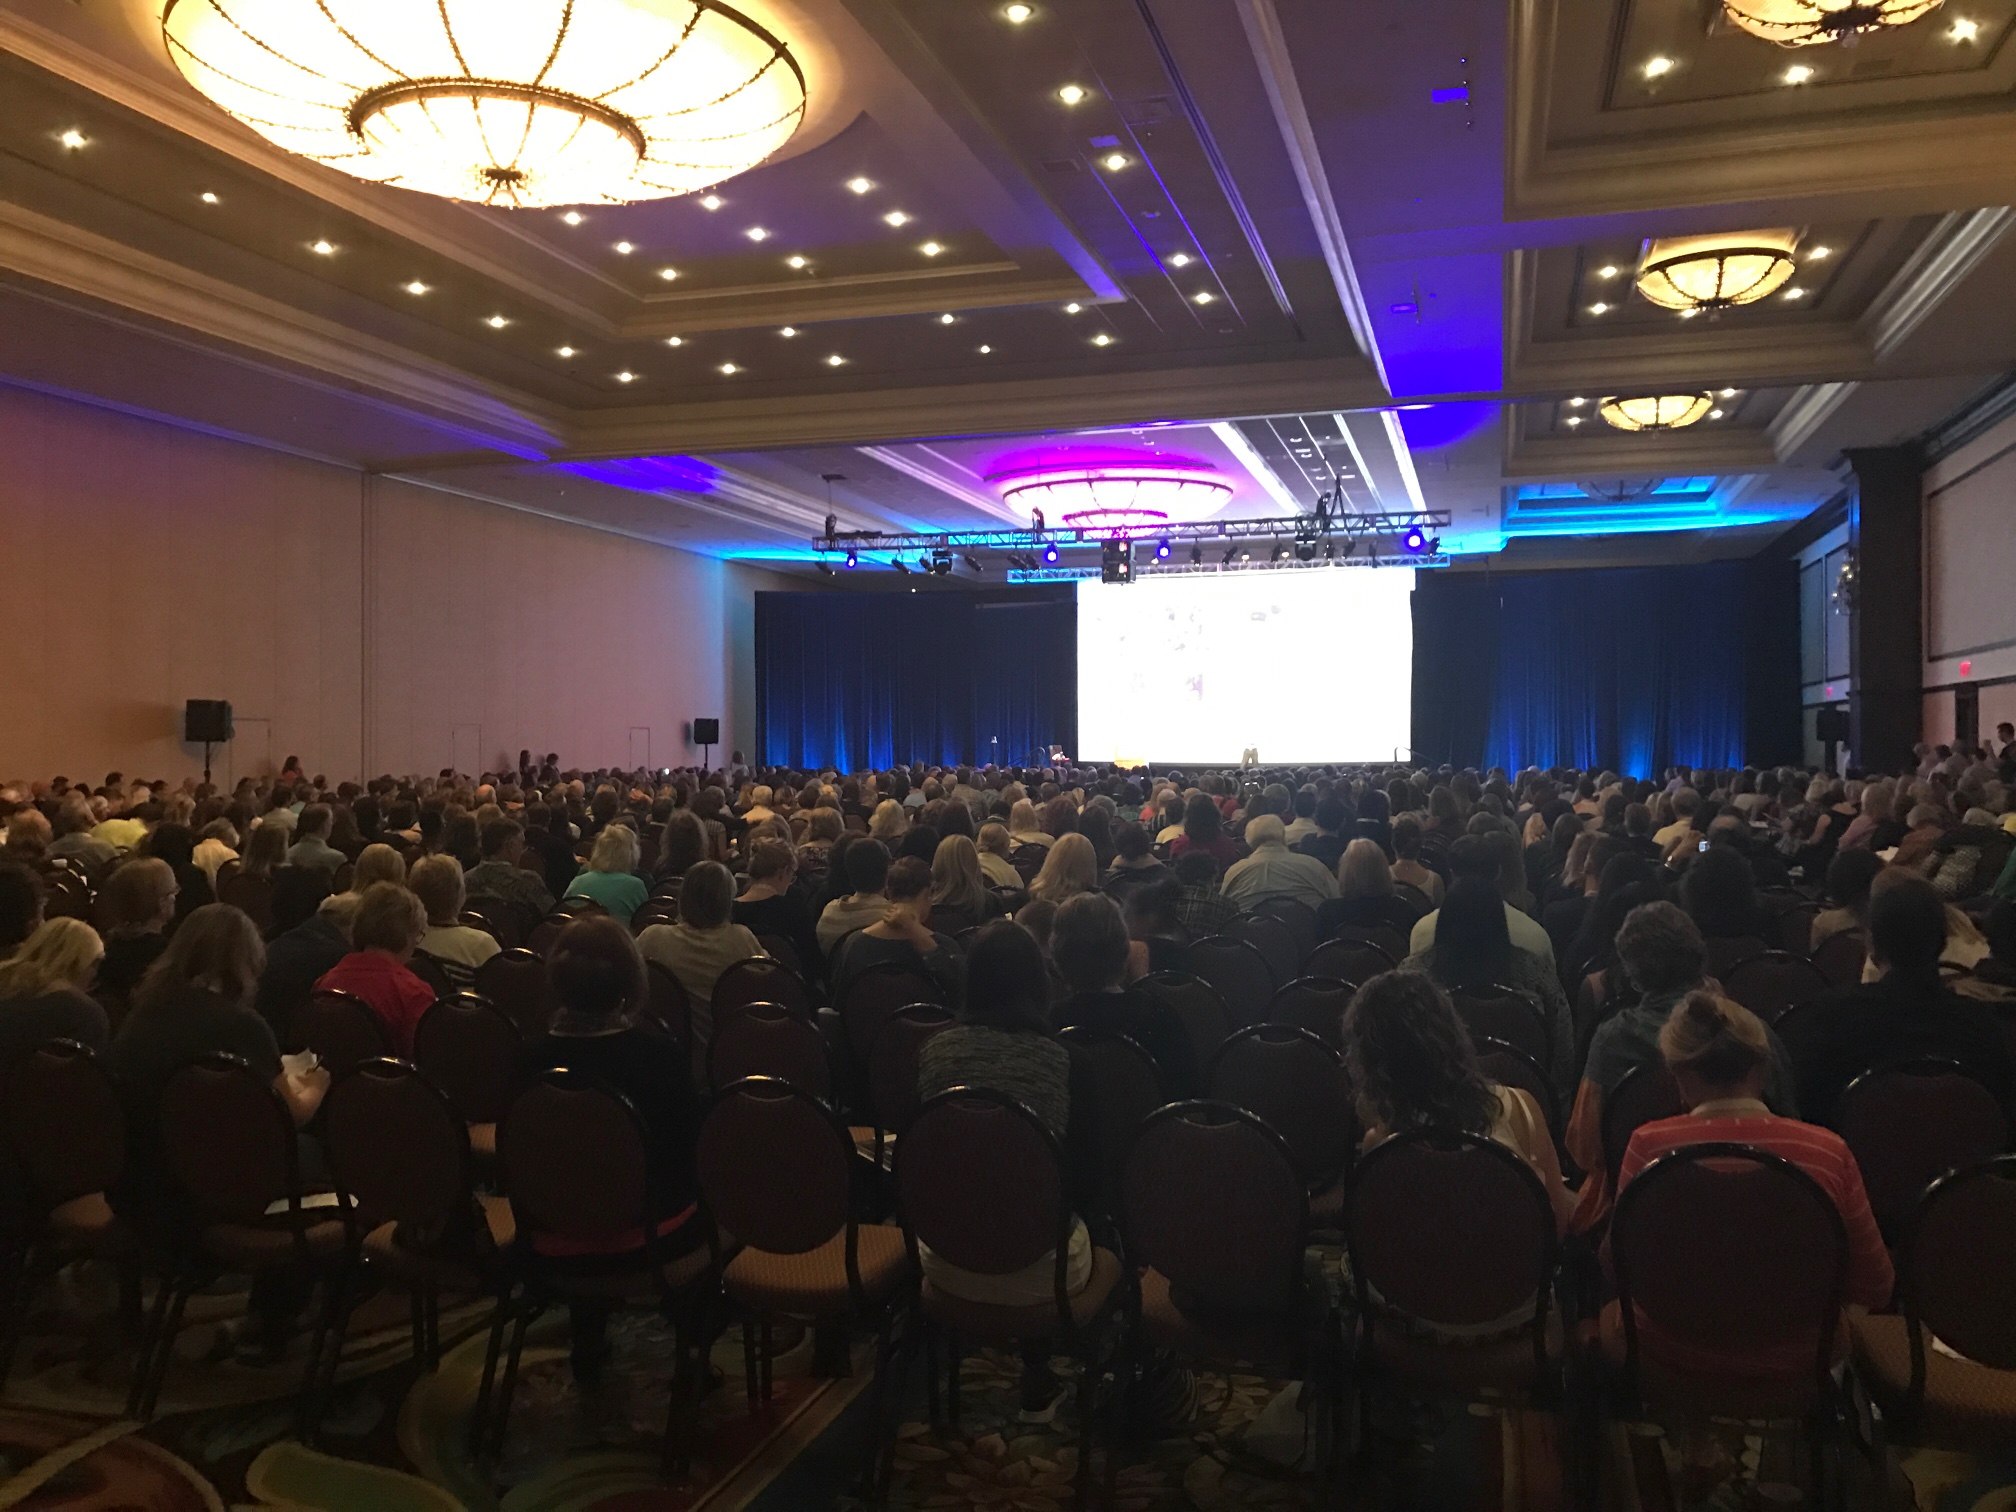 Dr. Group, DC's presentation was a success with a packed house audience at The Truth About Cancer Symposium.